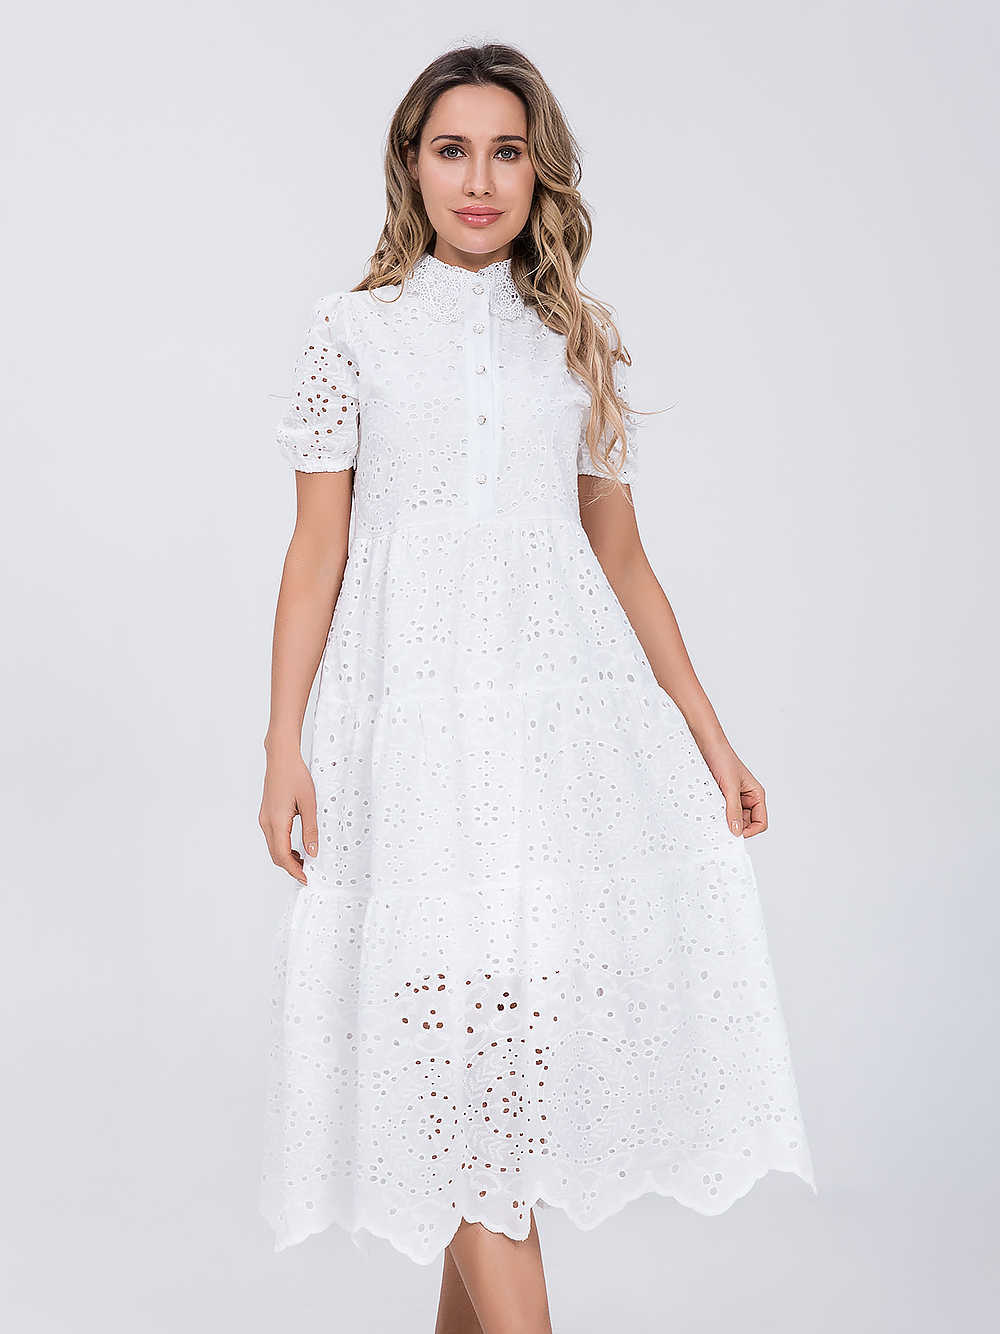 Casual Dresses Marwin Cotton Hollow Out Summer White dress Women Holiday Perppy Casual High Waist Ruffled Mini dresses A-line frills vestido W0315